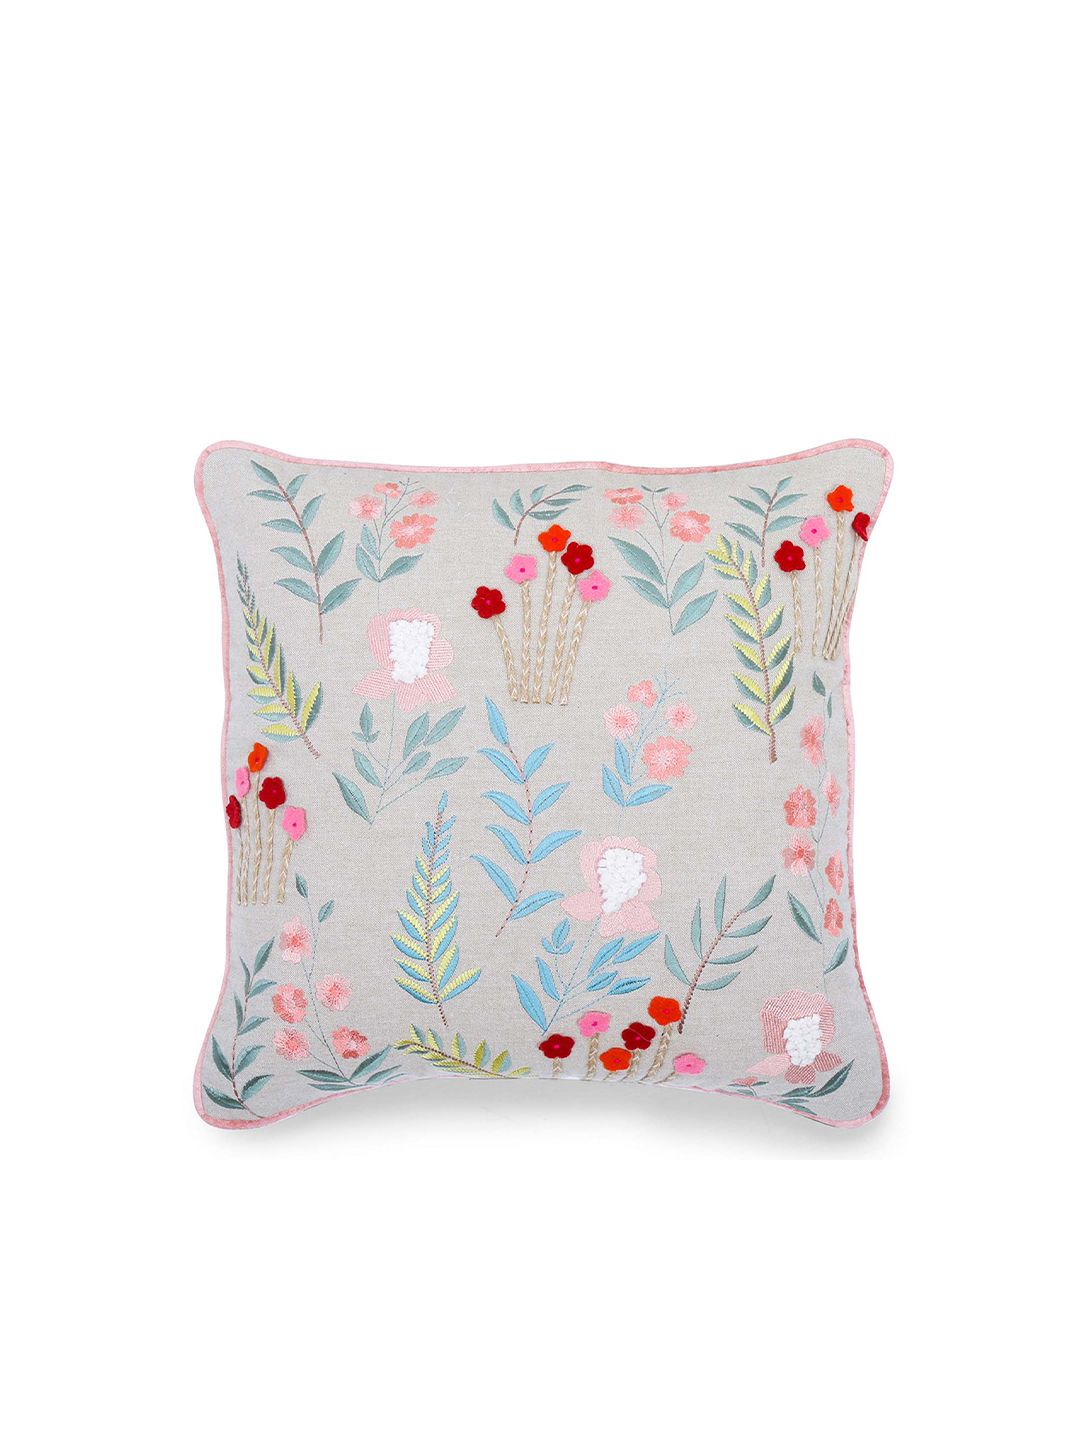 haus & kinder Grey & Green Embroidered Square Cushion Cover Price in India